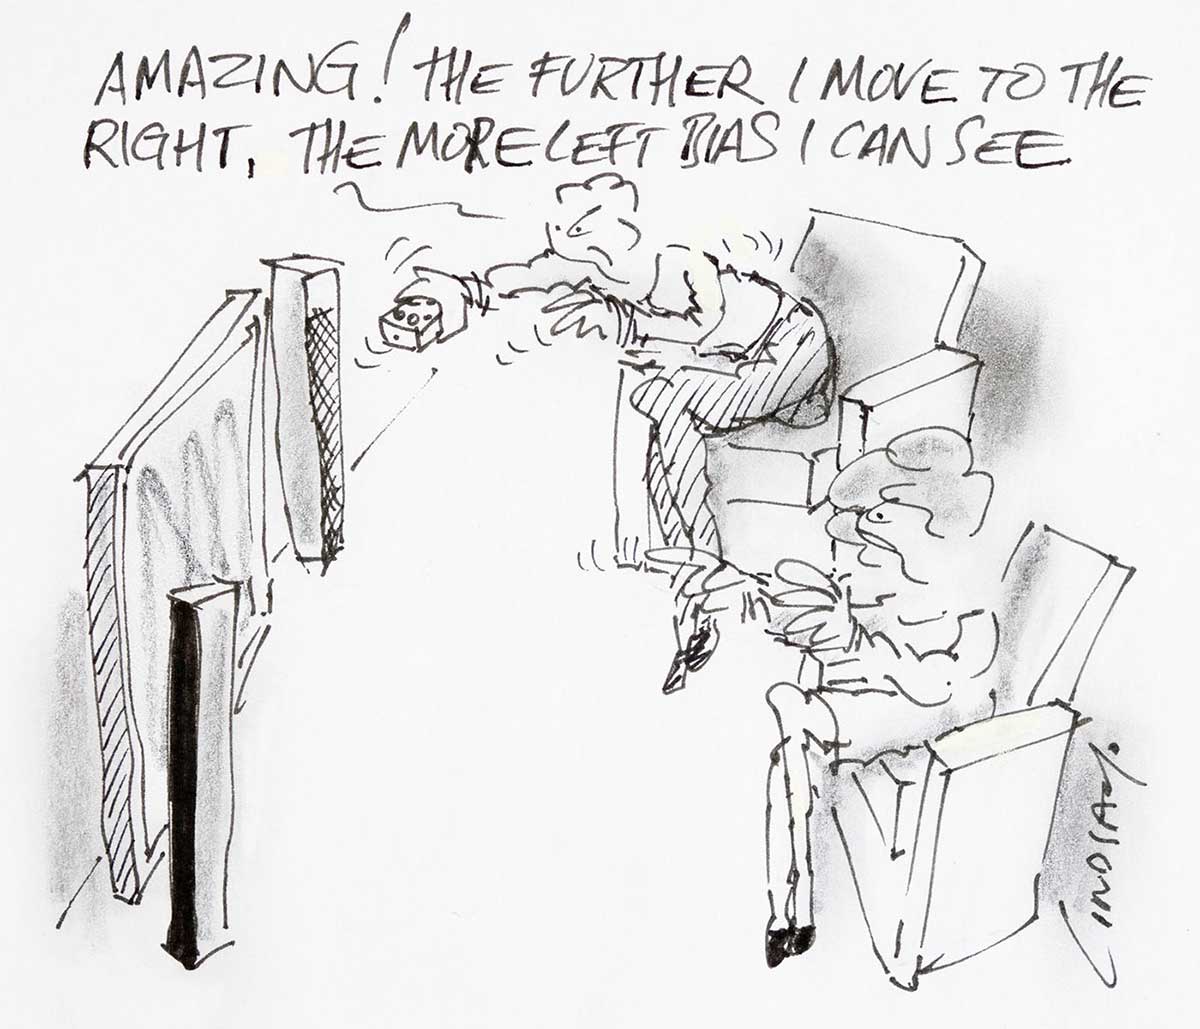 Political cartoon of two people watching ABC TV and one person commenting, 'Amazing!, the further I move to the right, the more left bias I can see'. - click to view larger image